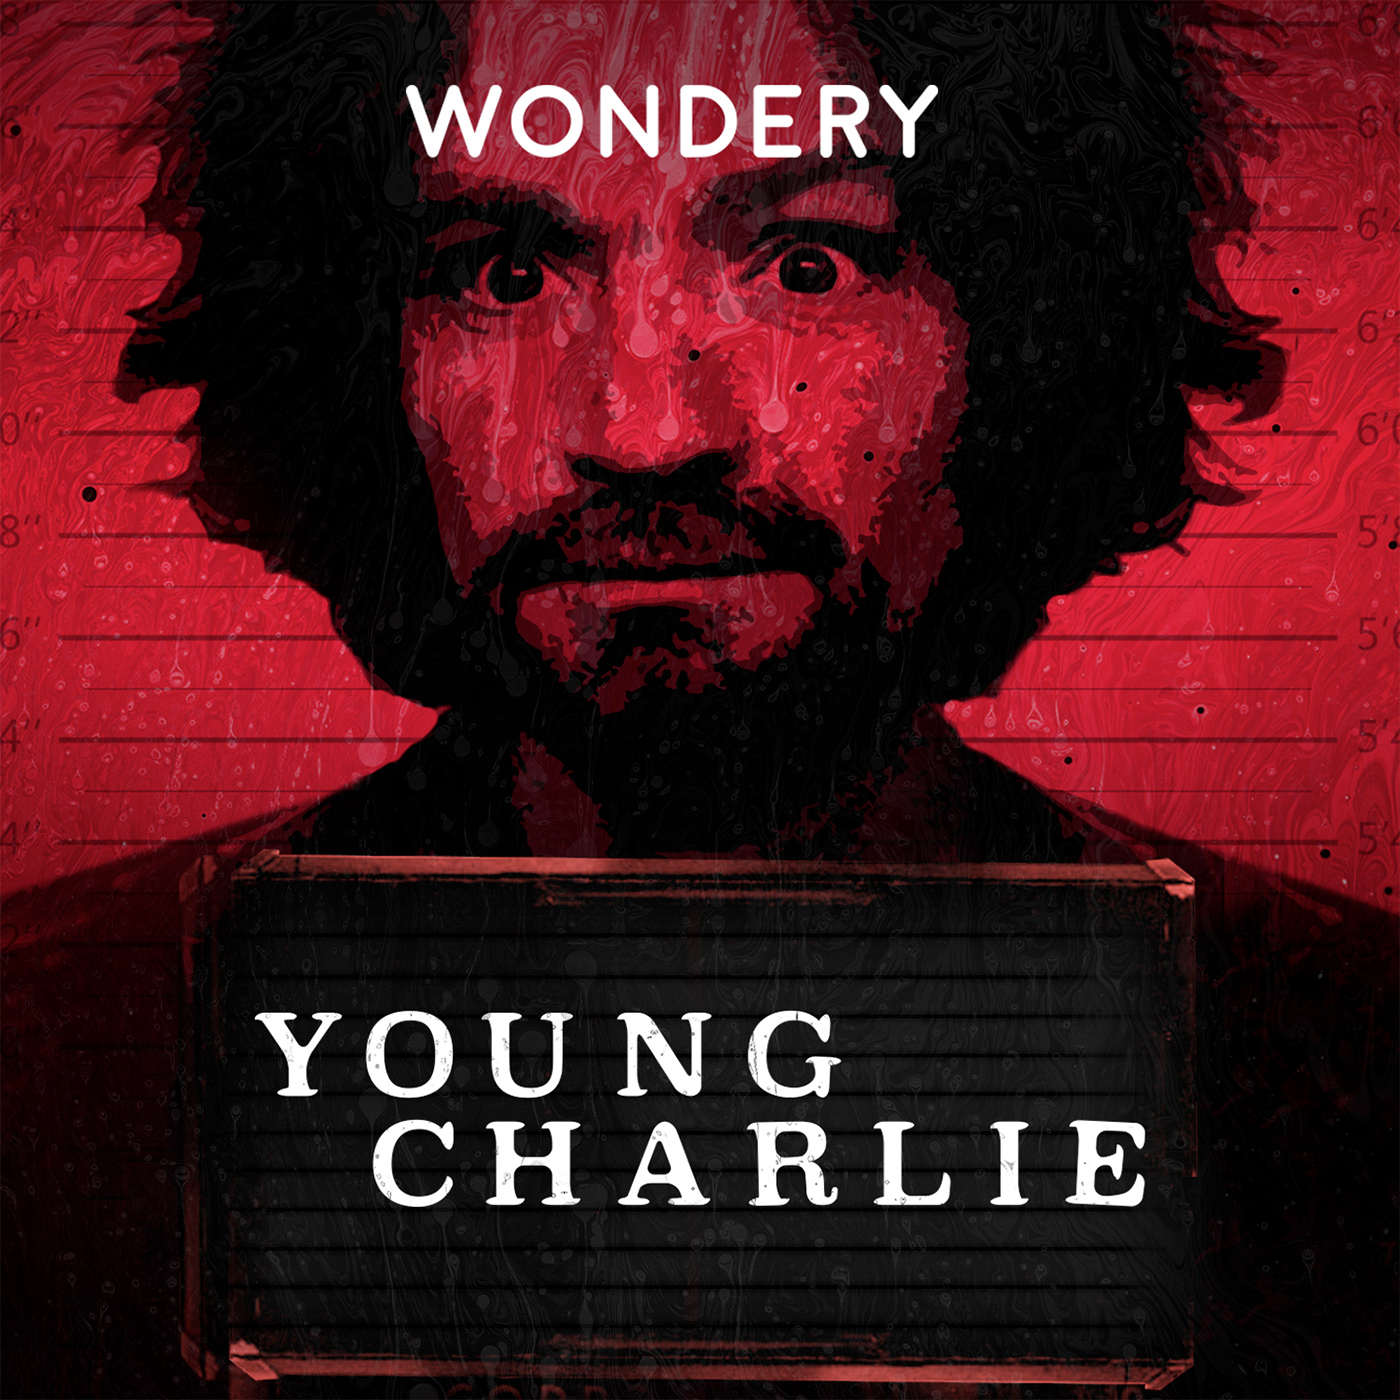 Young Charlie by Hollywood & Crime